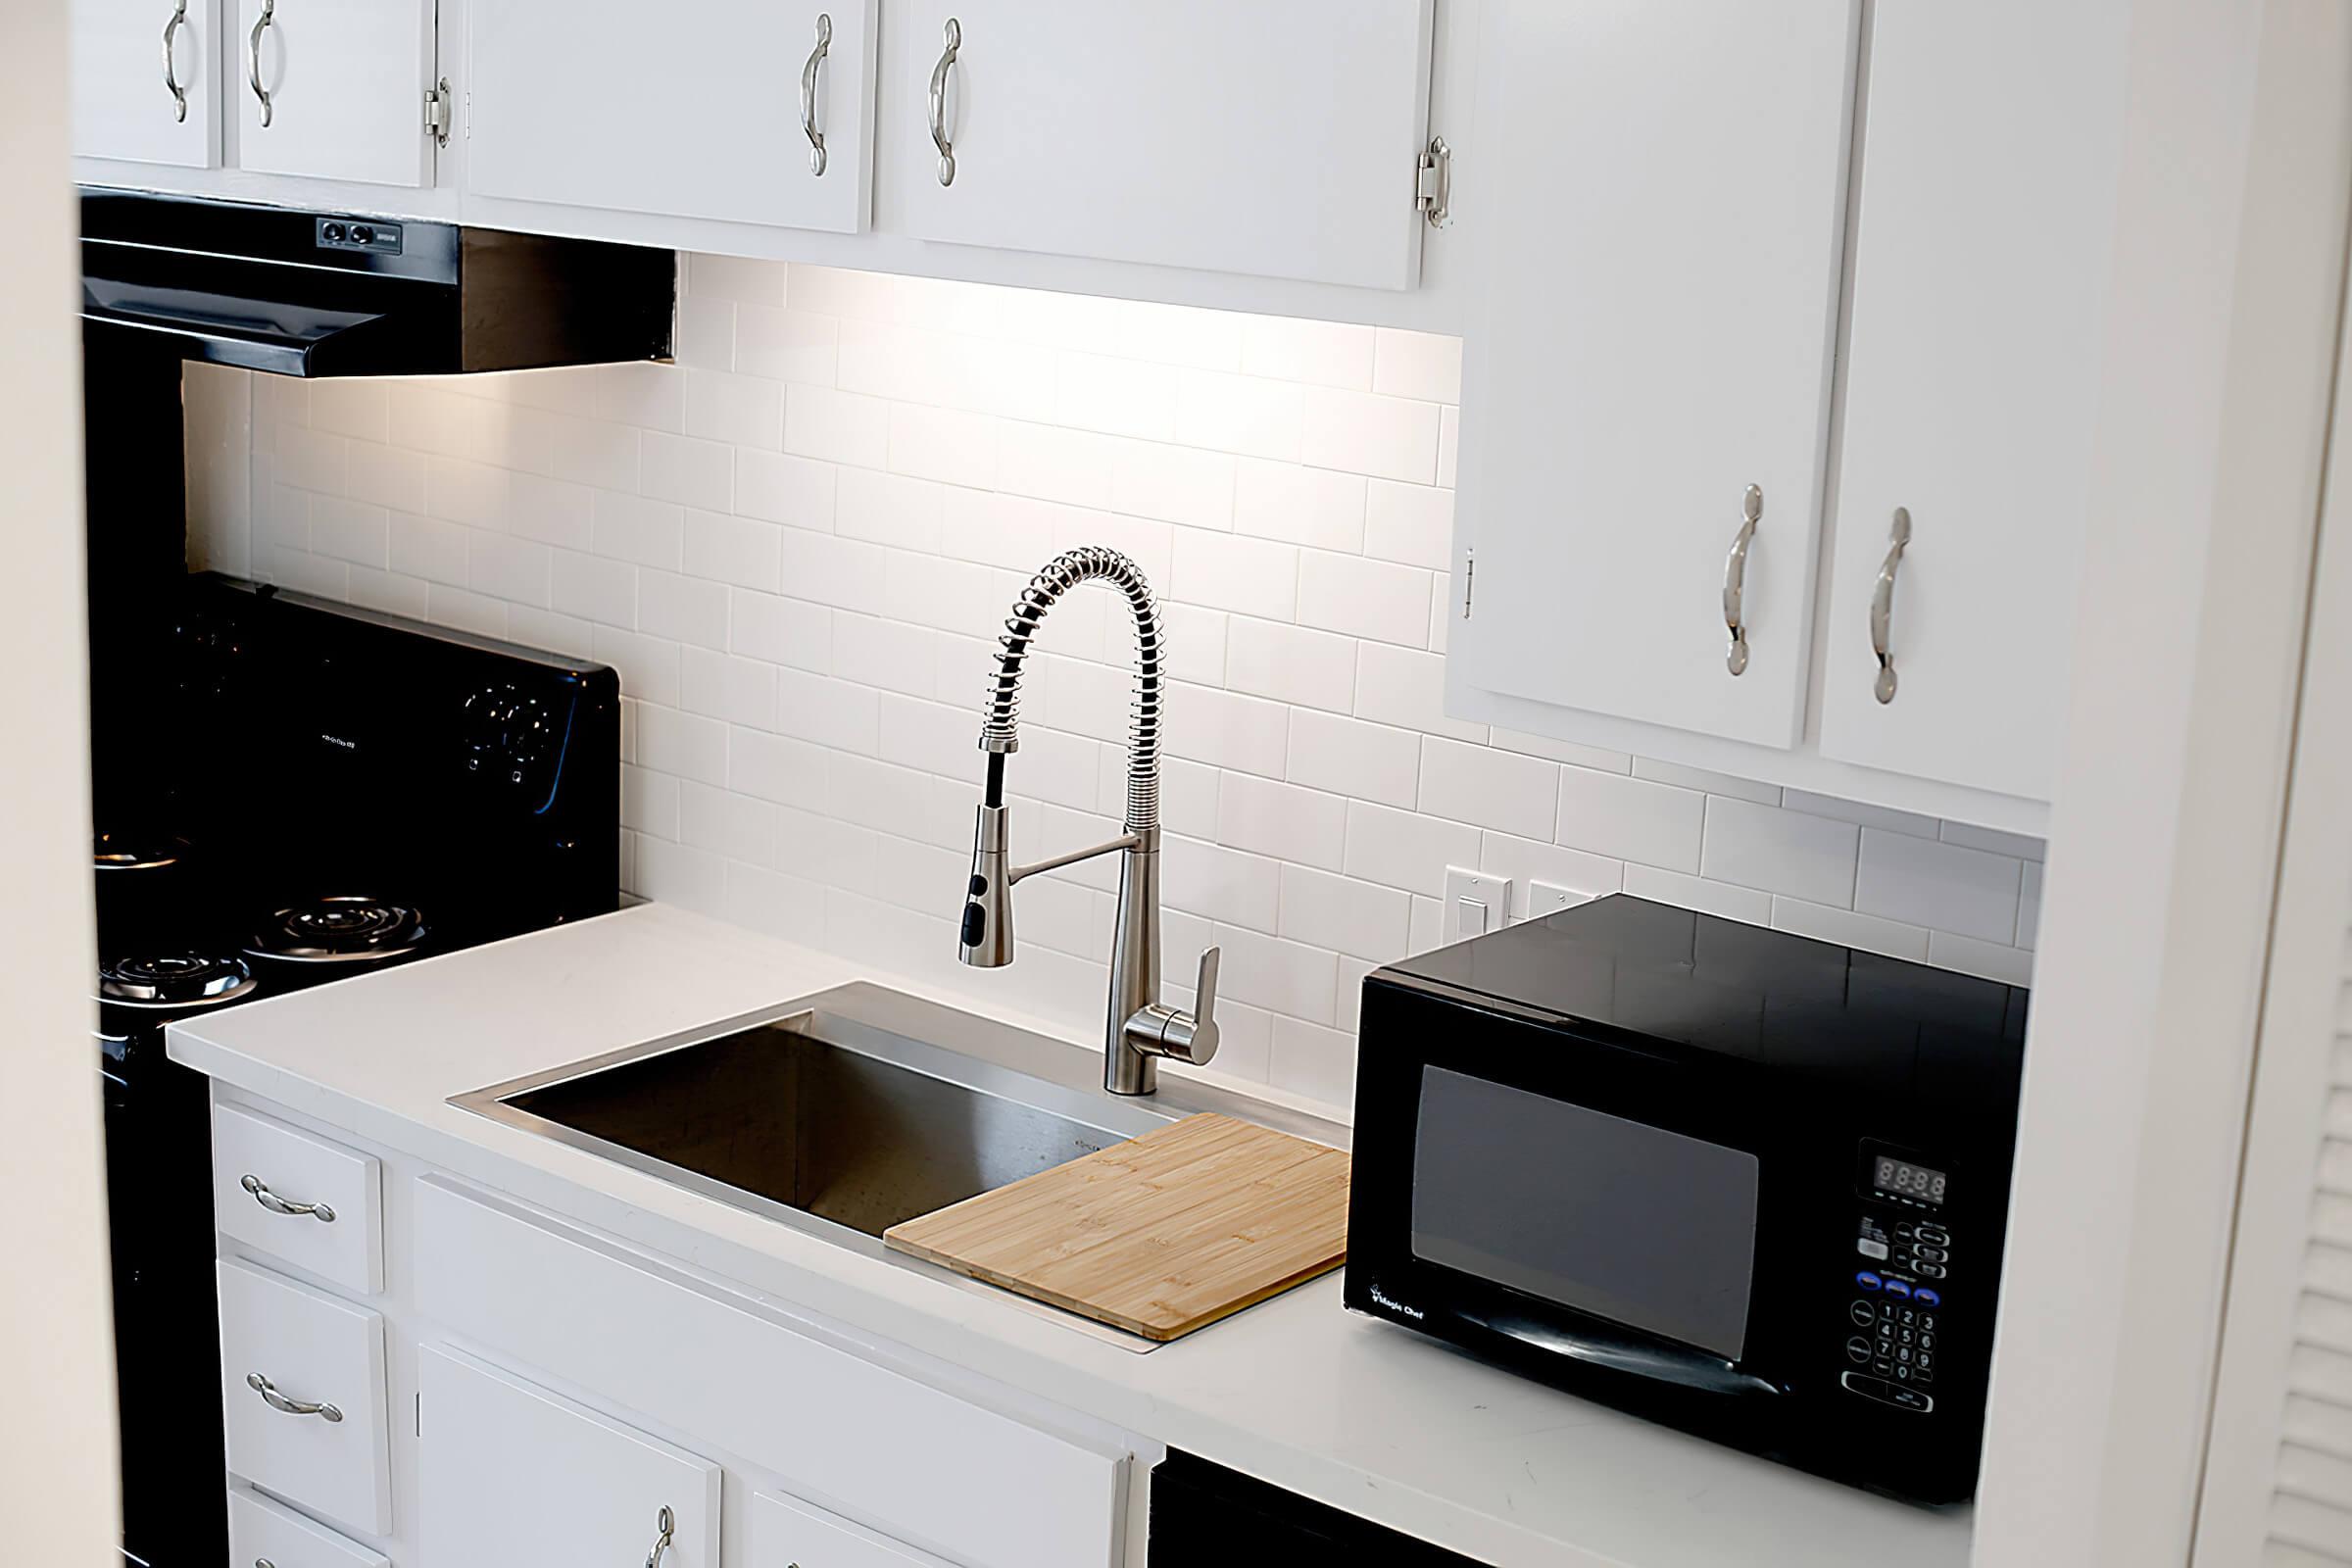 kitchen counter and cabinets.jpg